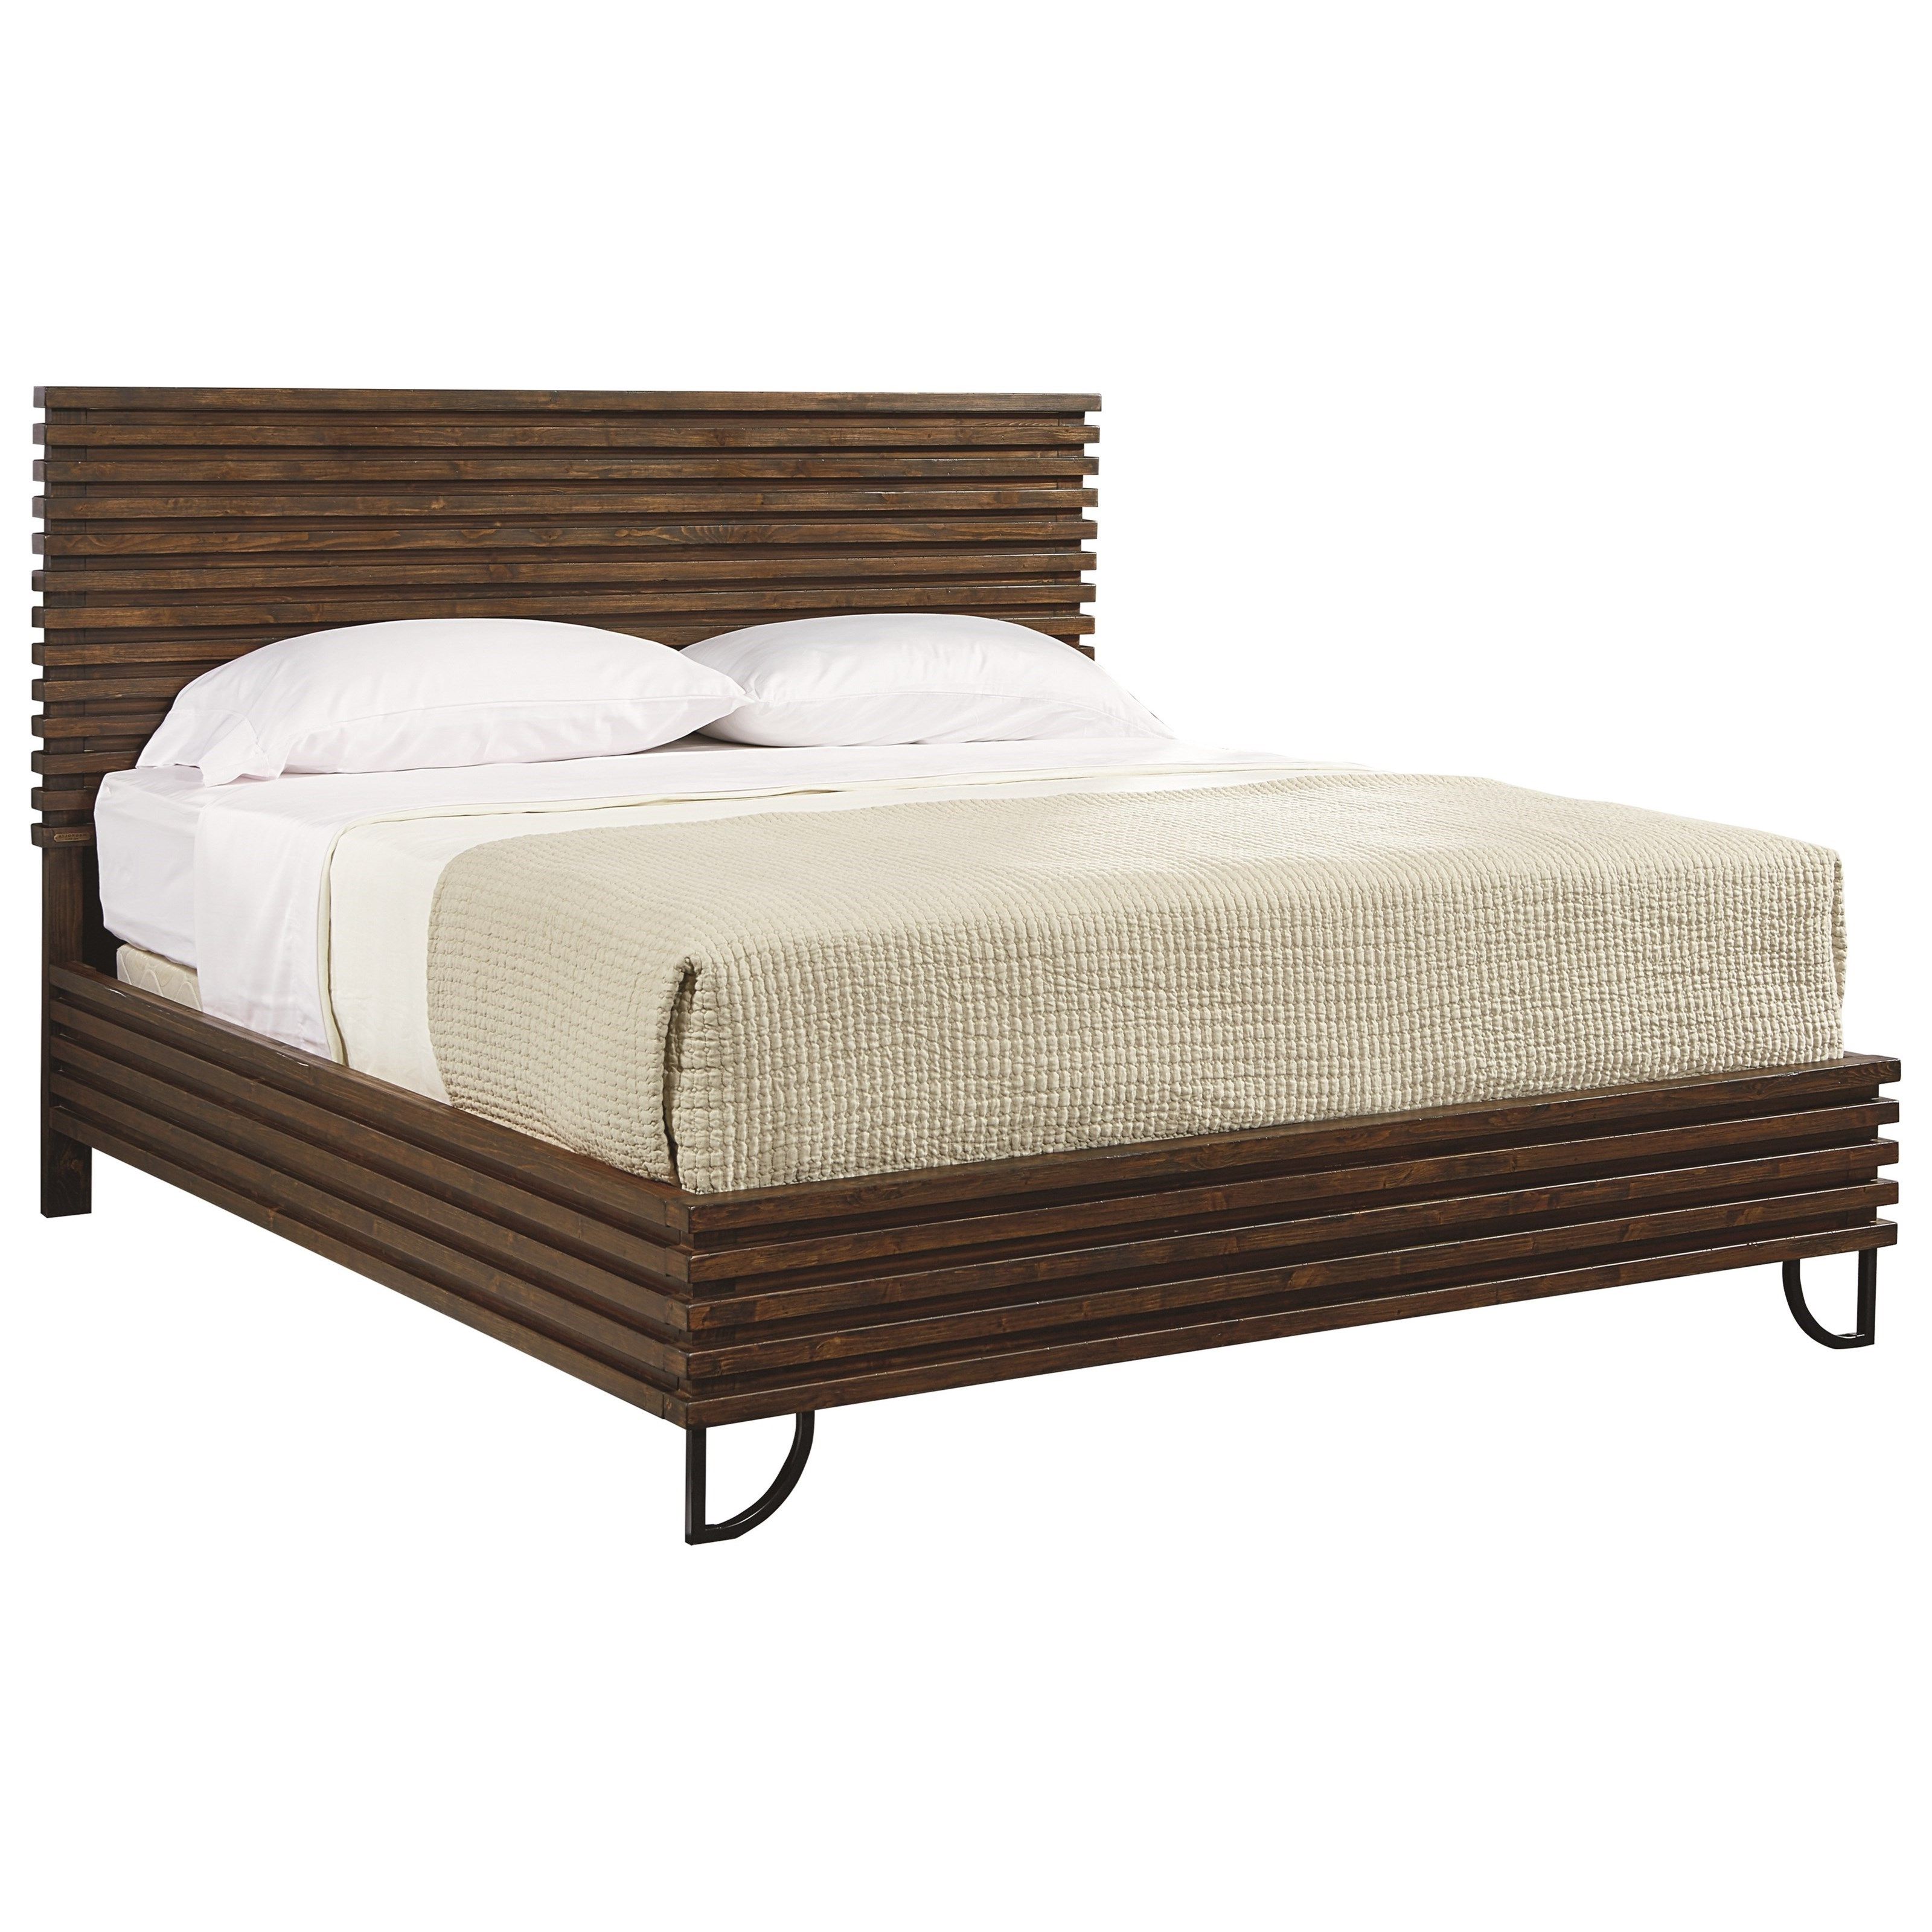 King Stacked Slat Bed With Retro Metal Legsmagnolia Home With Regard To Well Known Magnolia Home Entwine Rattan Arm Chairs (View 18 of 20)